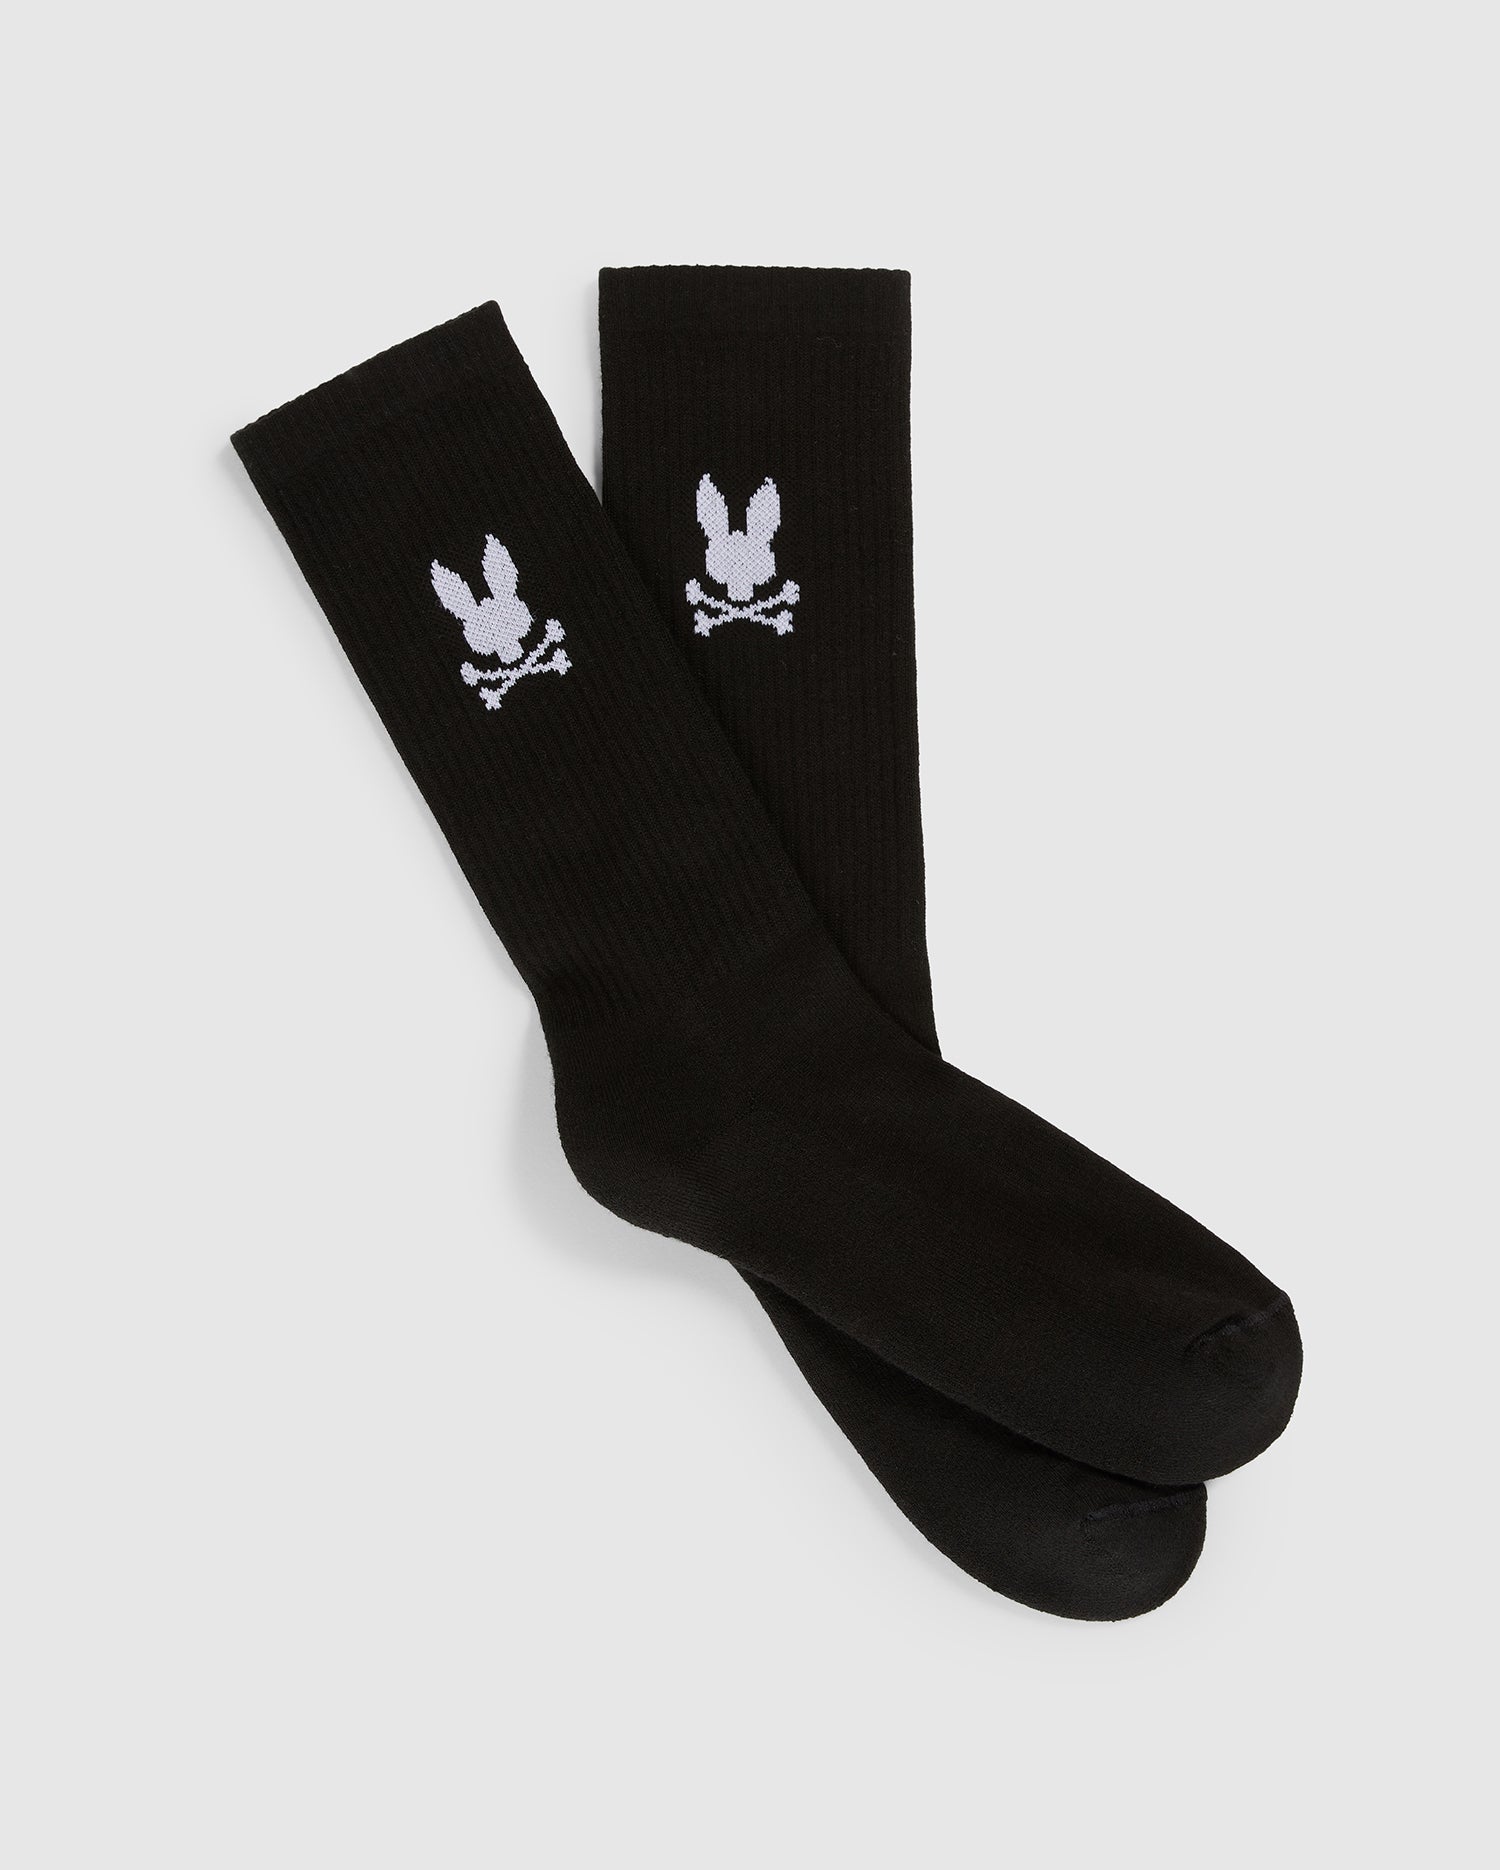 A pair of black Psycho Bunny MENS SPORT SOCK - B6F775C200 featuring a white design of a rabbit skull and crossbones toward the top. Made from luxurious Peruvian Pima cotton with a hint of stretch, these socks are laid out on a plain white background, with one sock slightly overlapping the other.